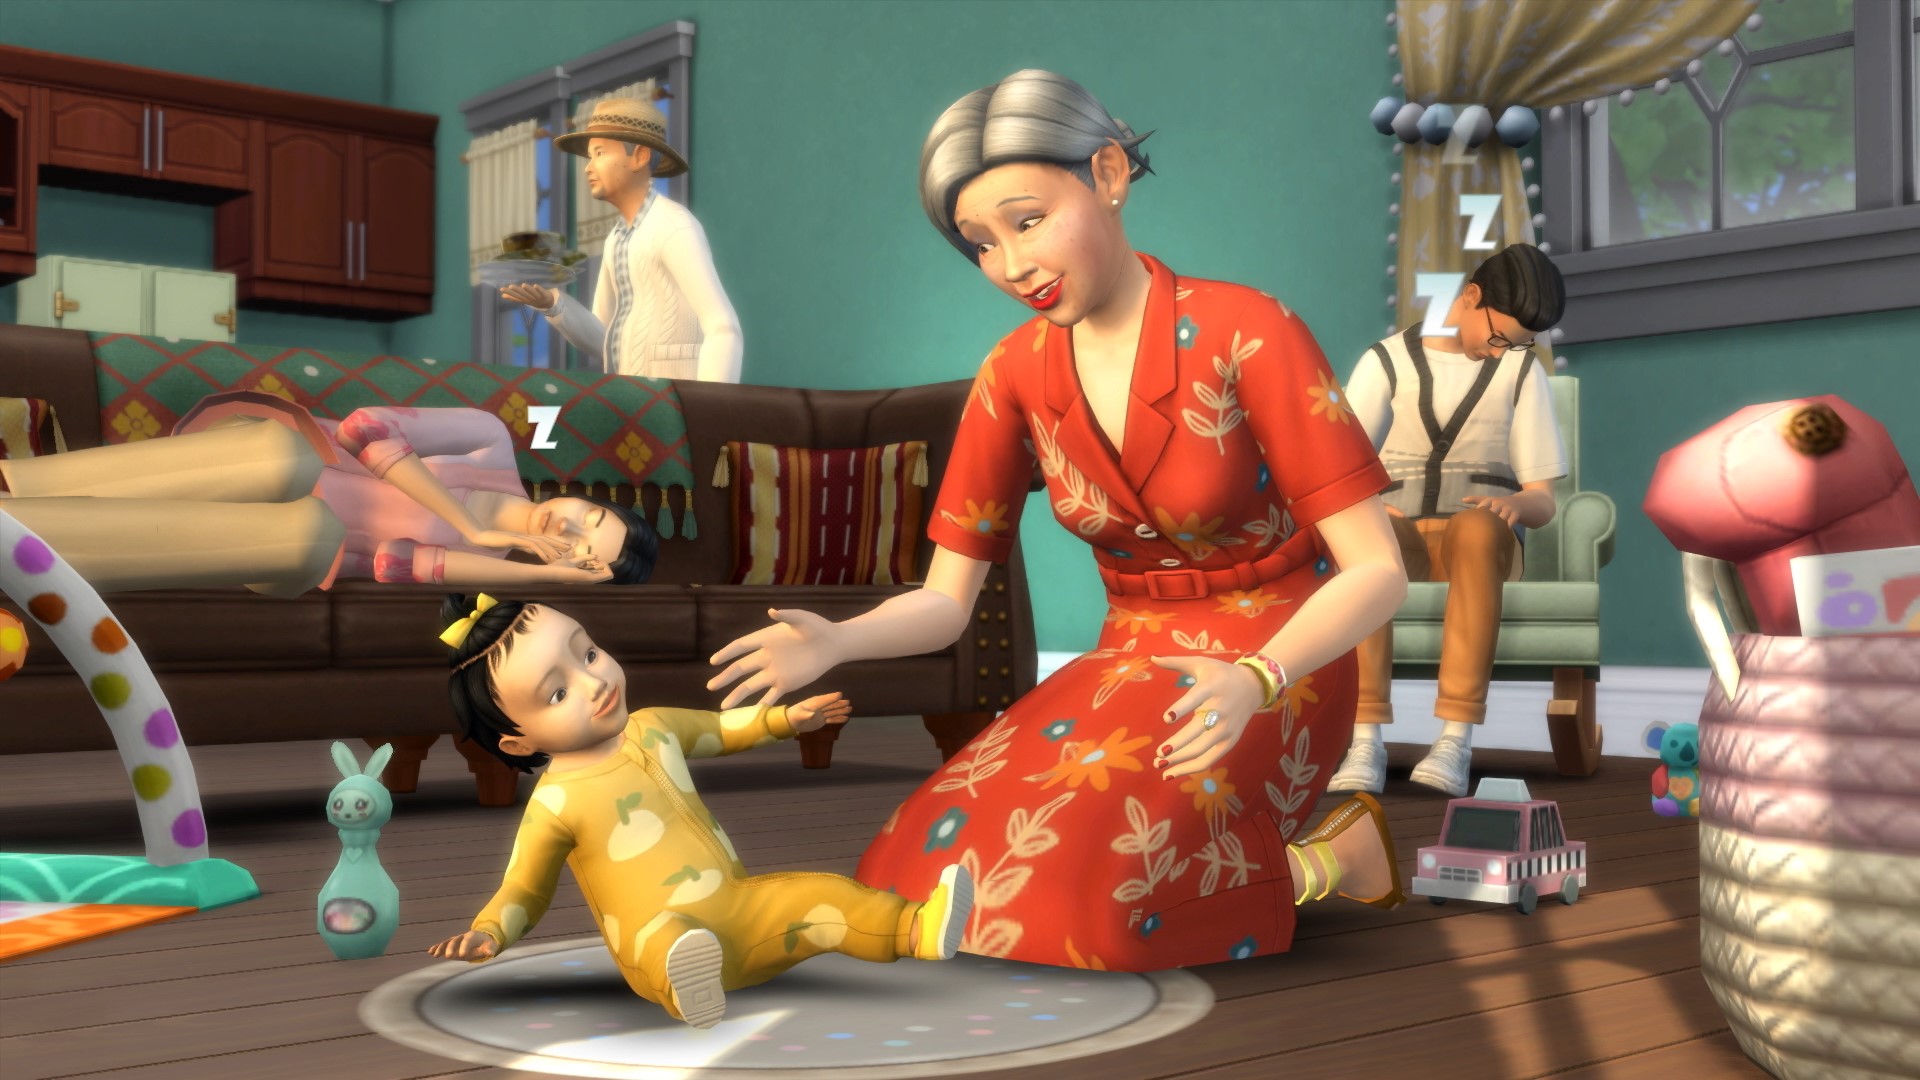 A baby Sim and an elder Sim sit together on the floor, while the Sims behind them are asleep in various positions.